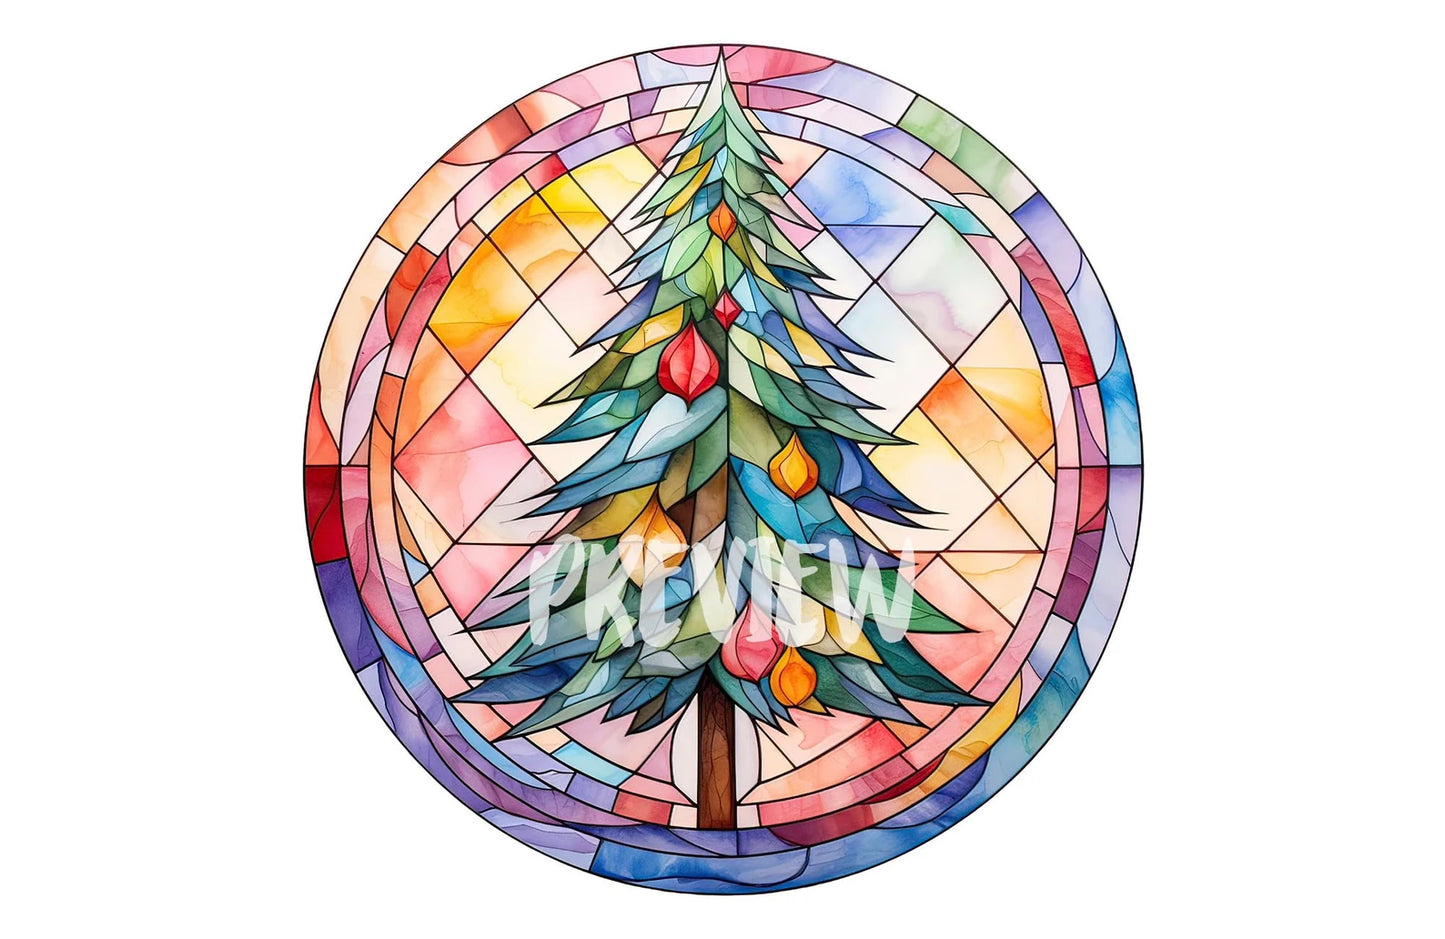 Watercolor Stained glass Christmas tree